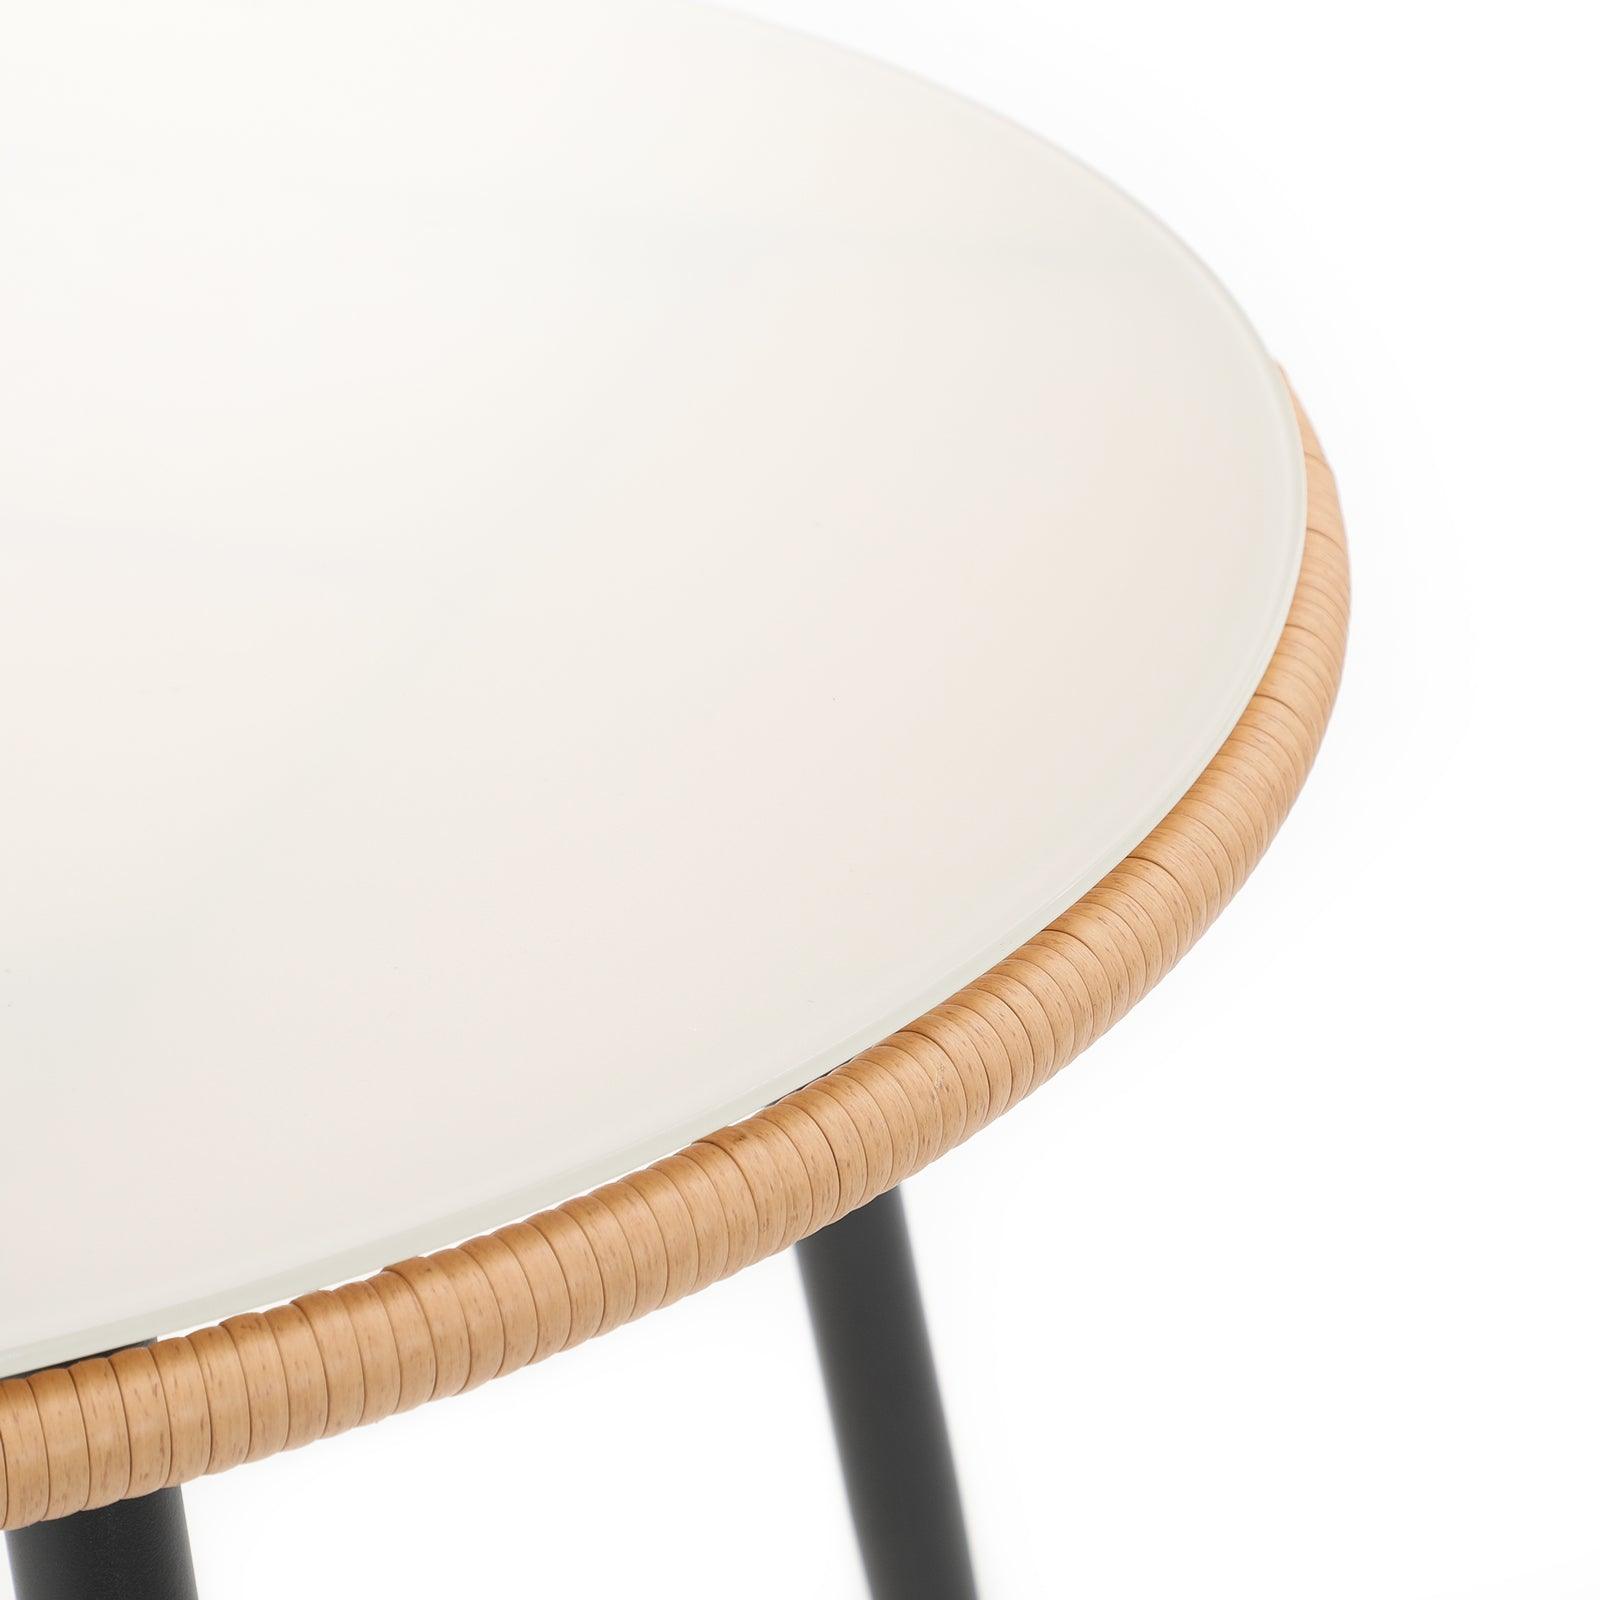 Menorca Dining Table, Round Shape, Tempered Glass, Hand-woven wicker design detial- Jardina Furniture